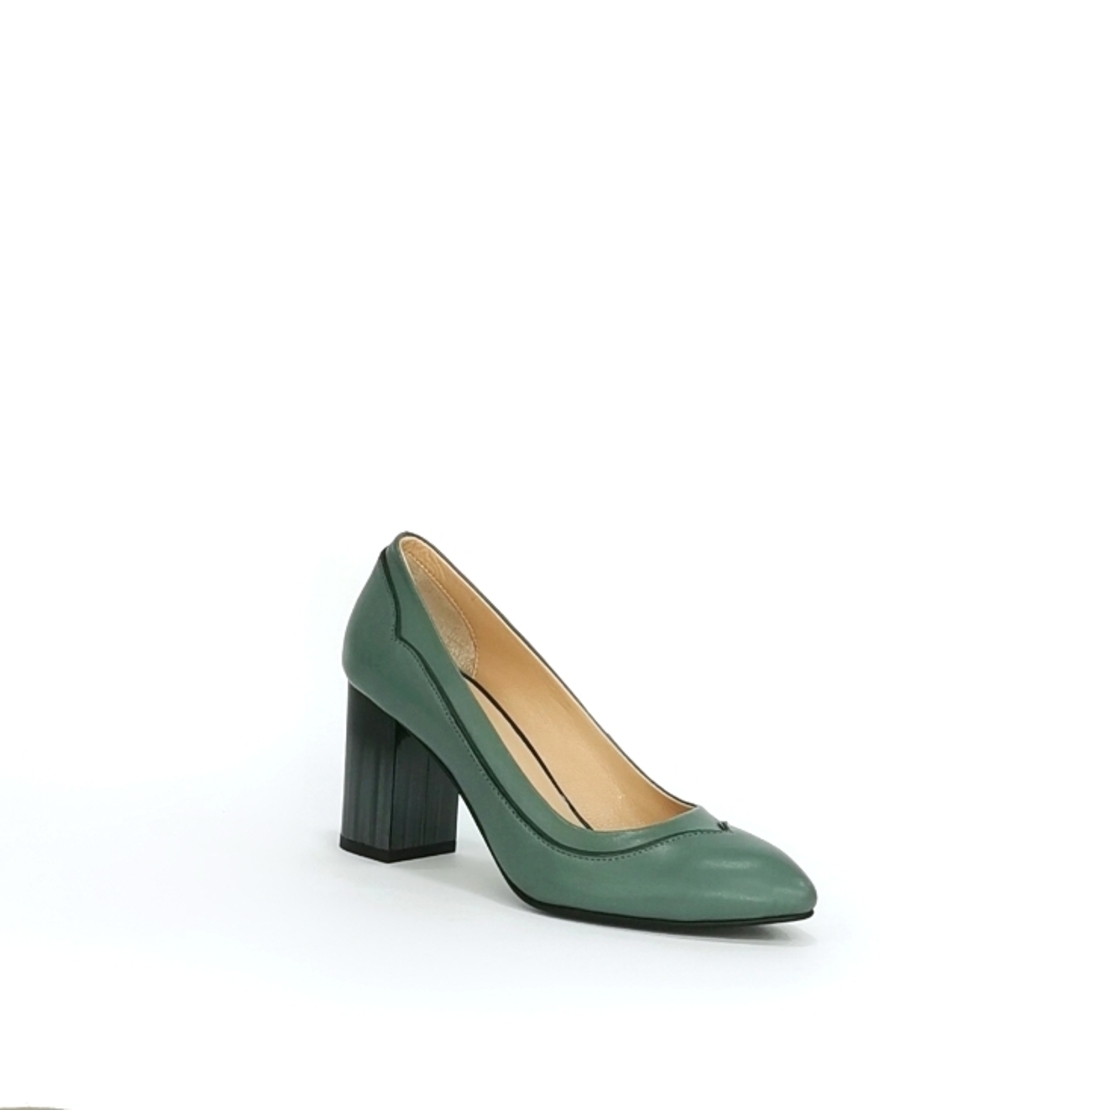 Women's elegant shoes made of natural leather in the color green/7129